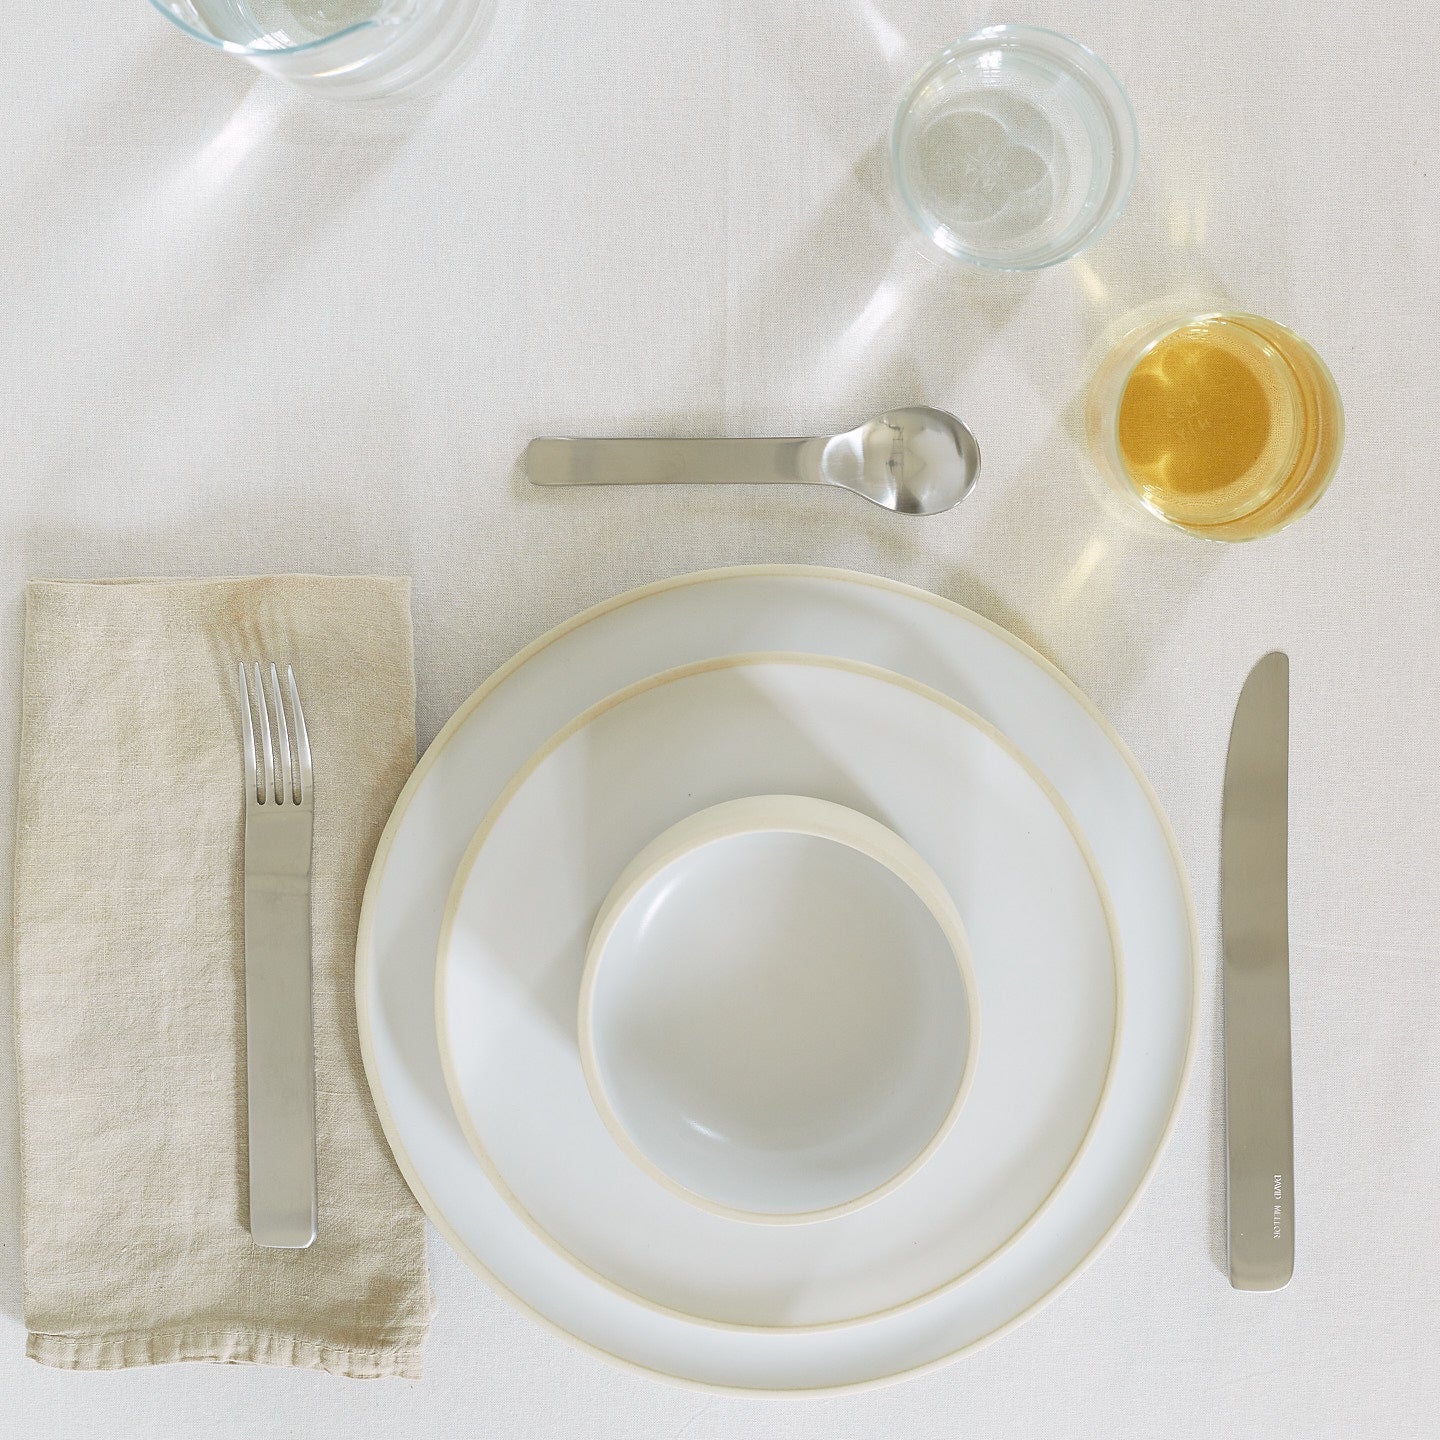 Placesetting with Modernist Dinnerware on white tablecloth.